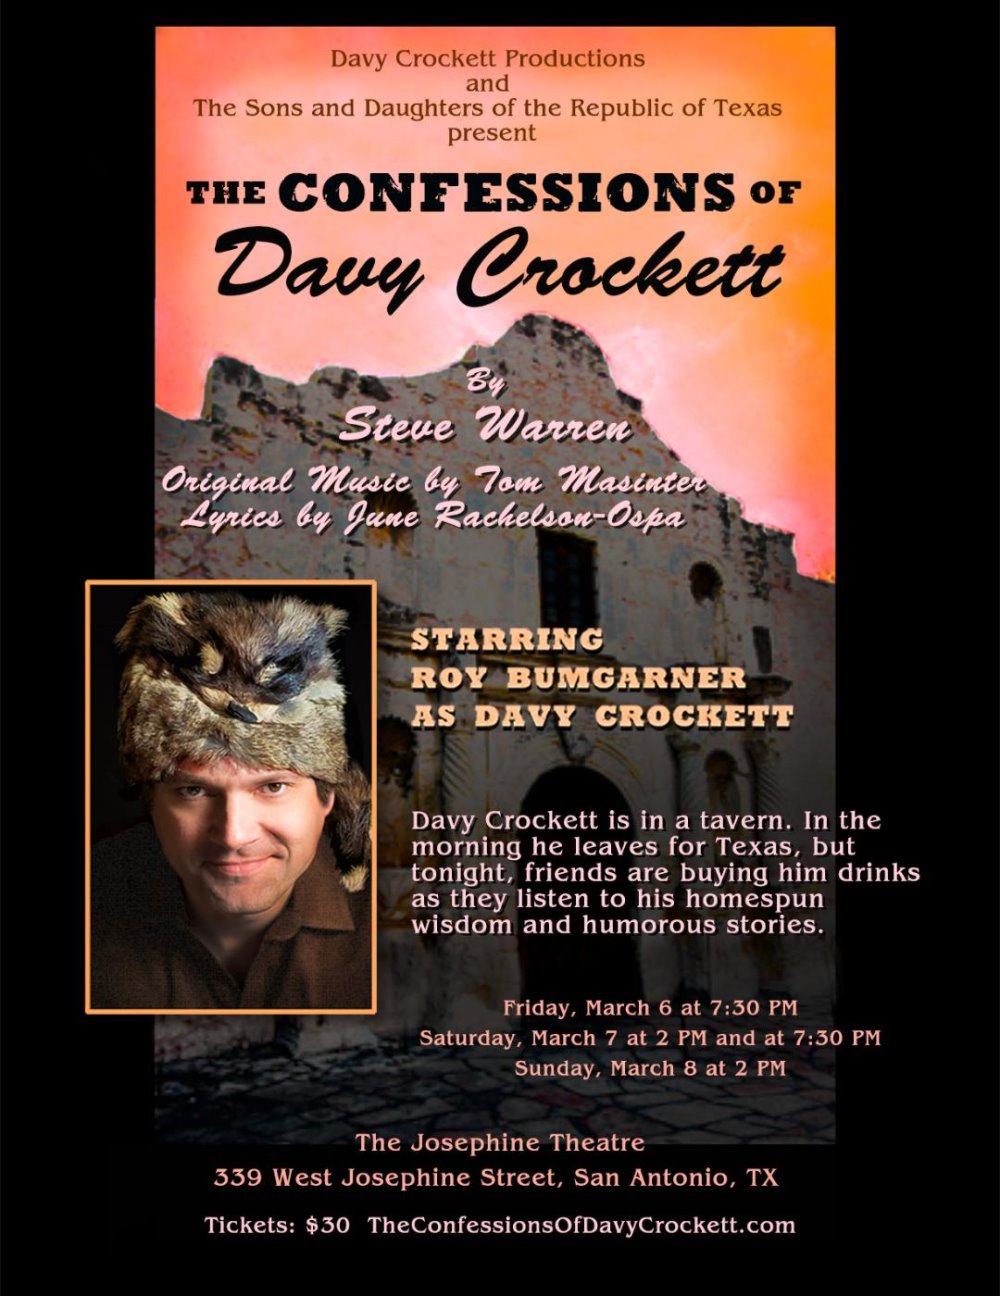 The Confessions of Davy Crockett by Davy Crockett Productions